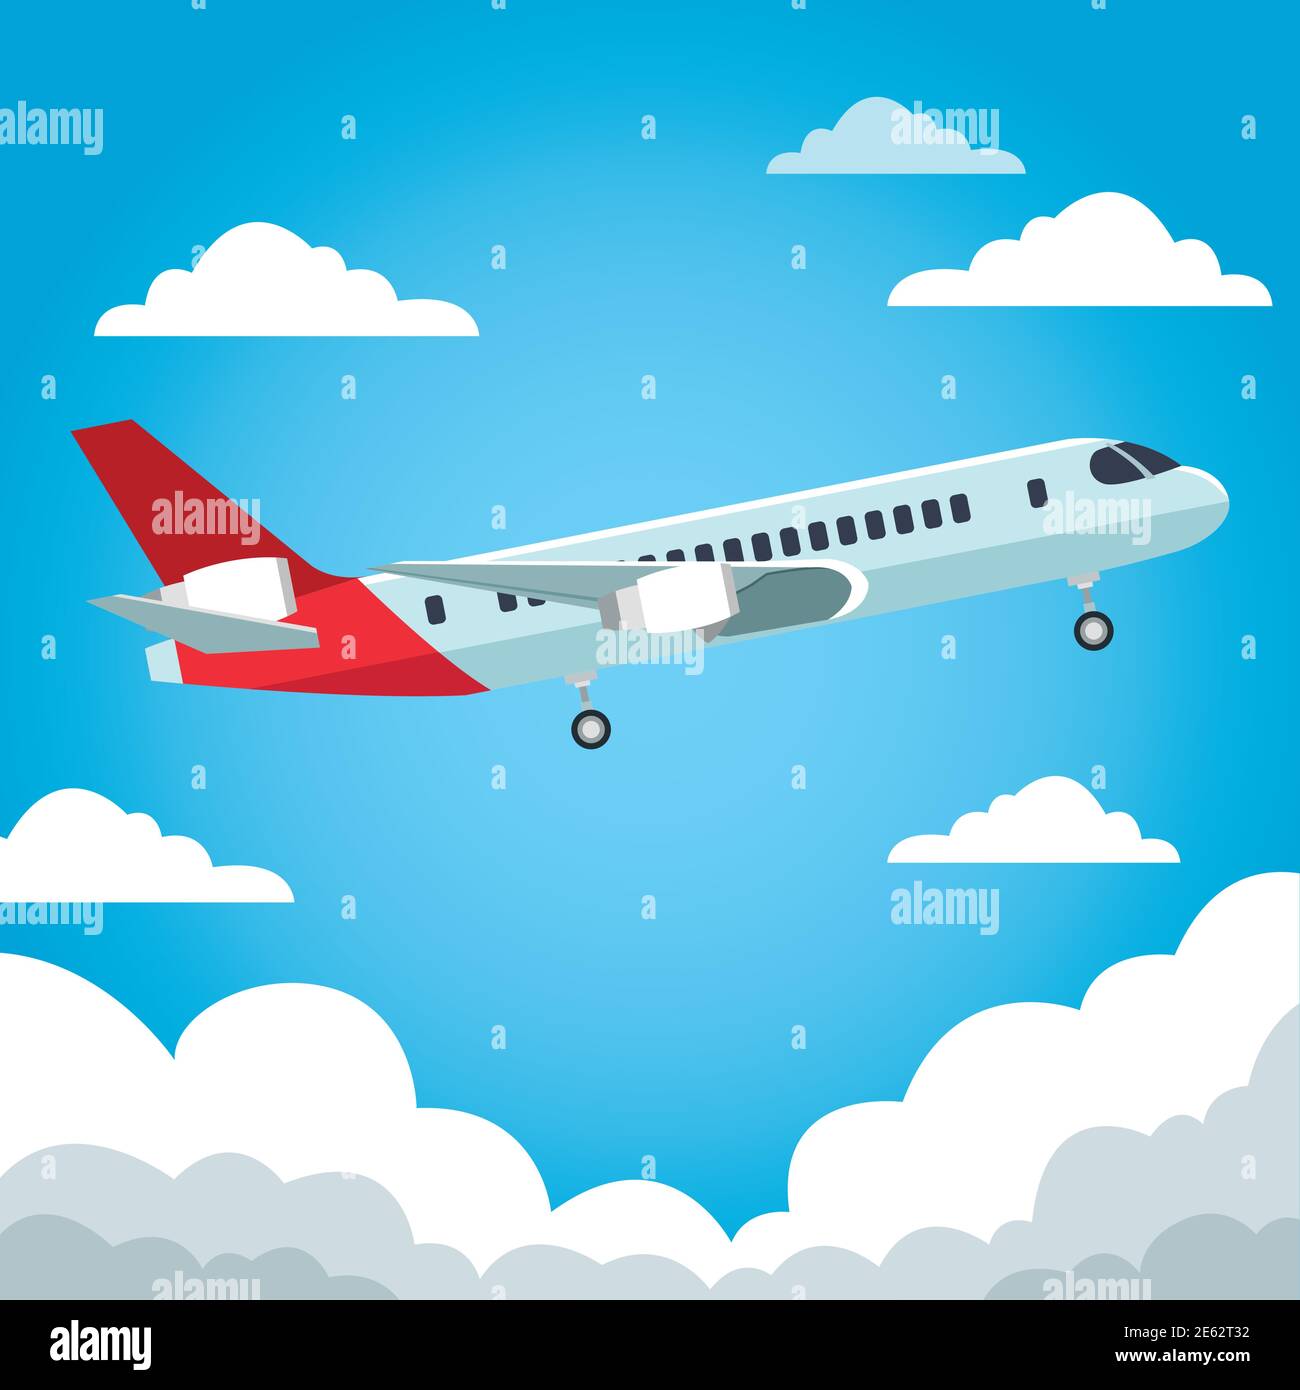 airplane airline flying travel in the sky vector illustration design Stock Vector